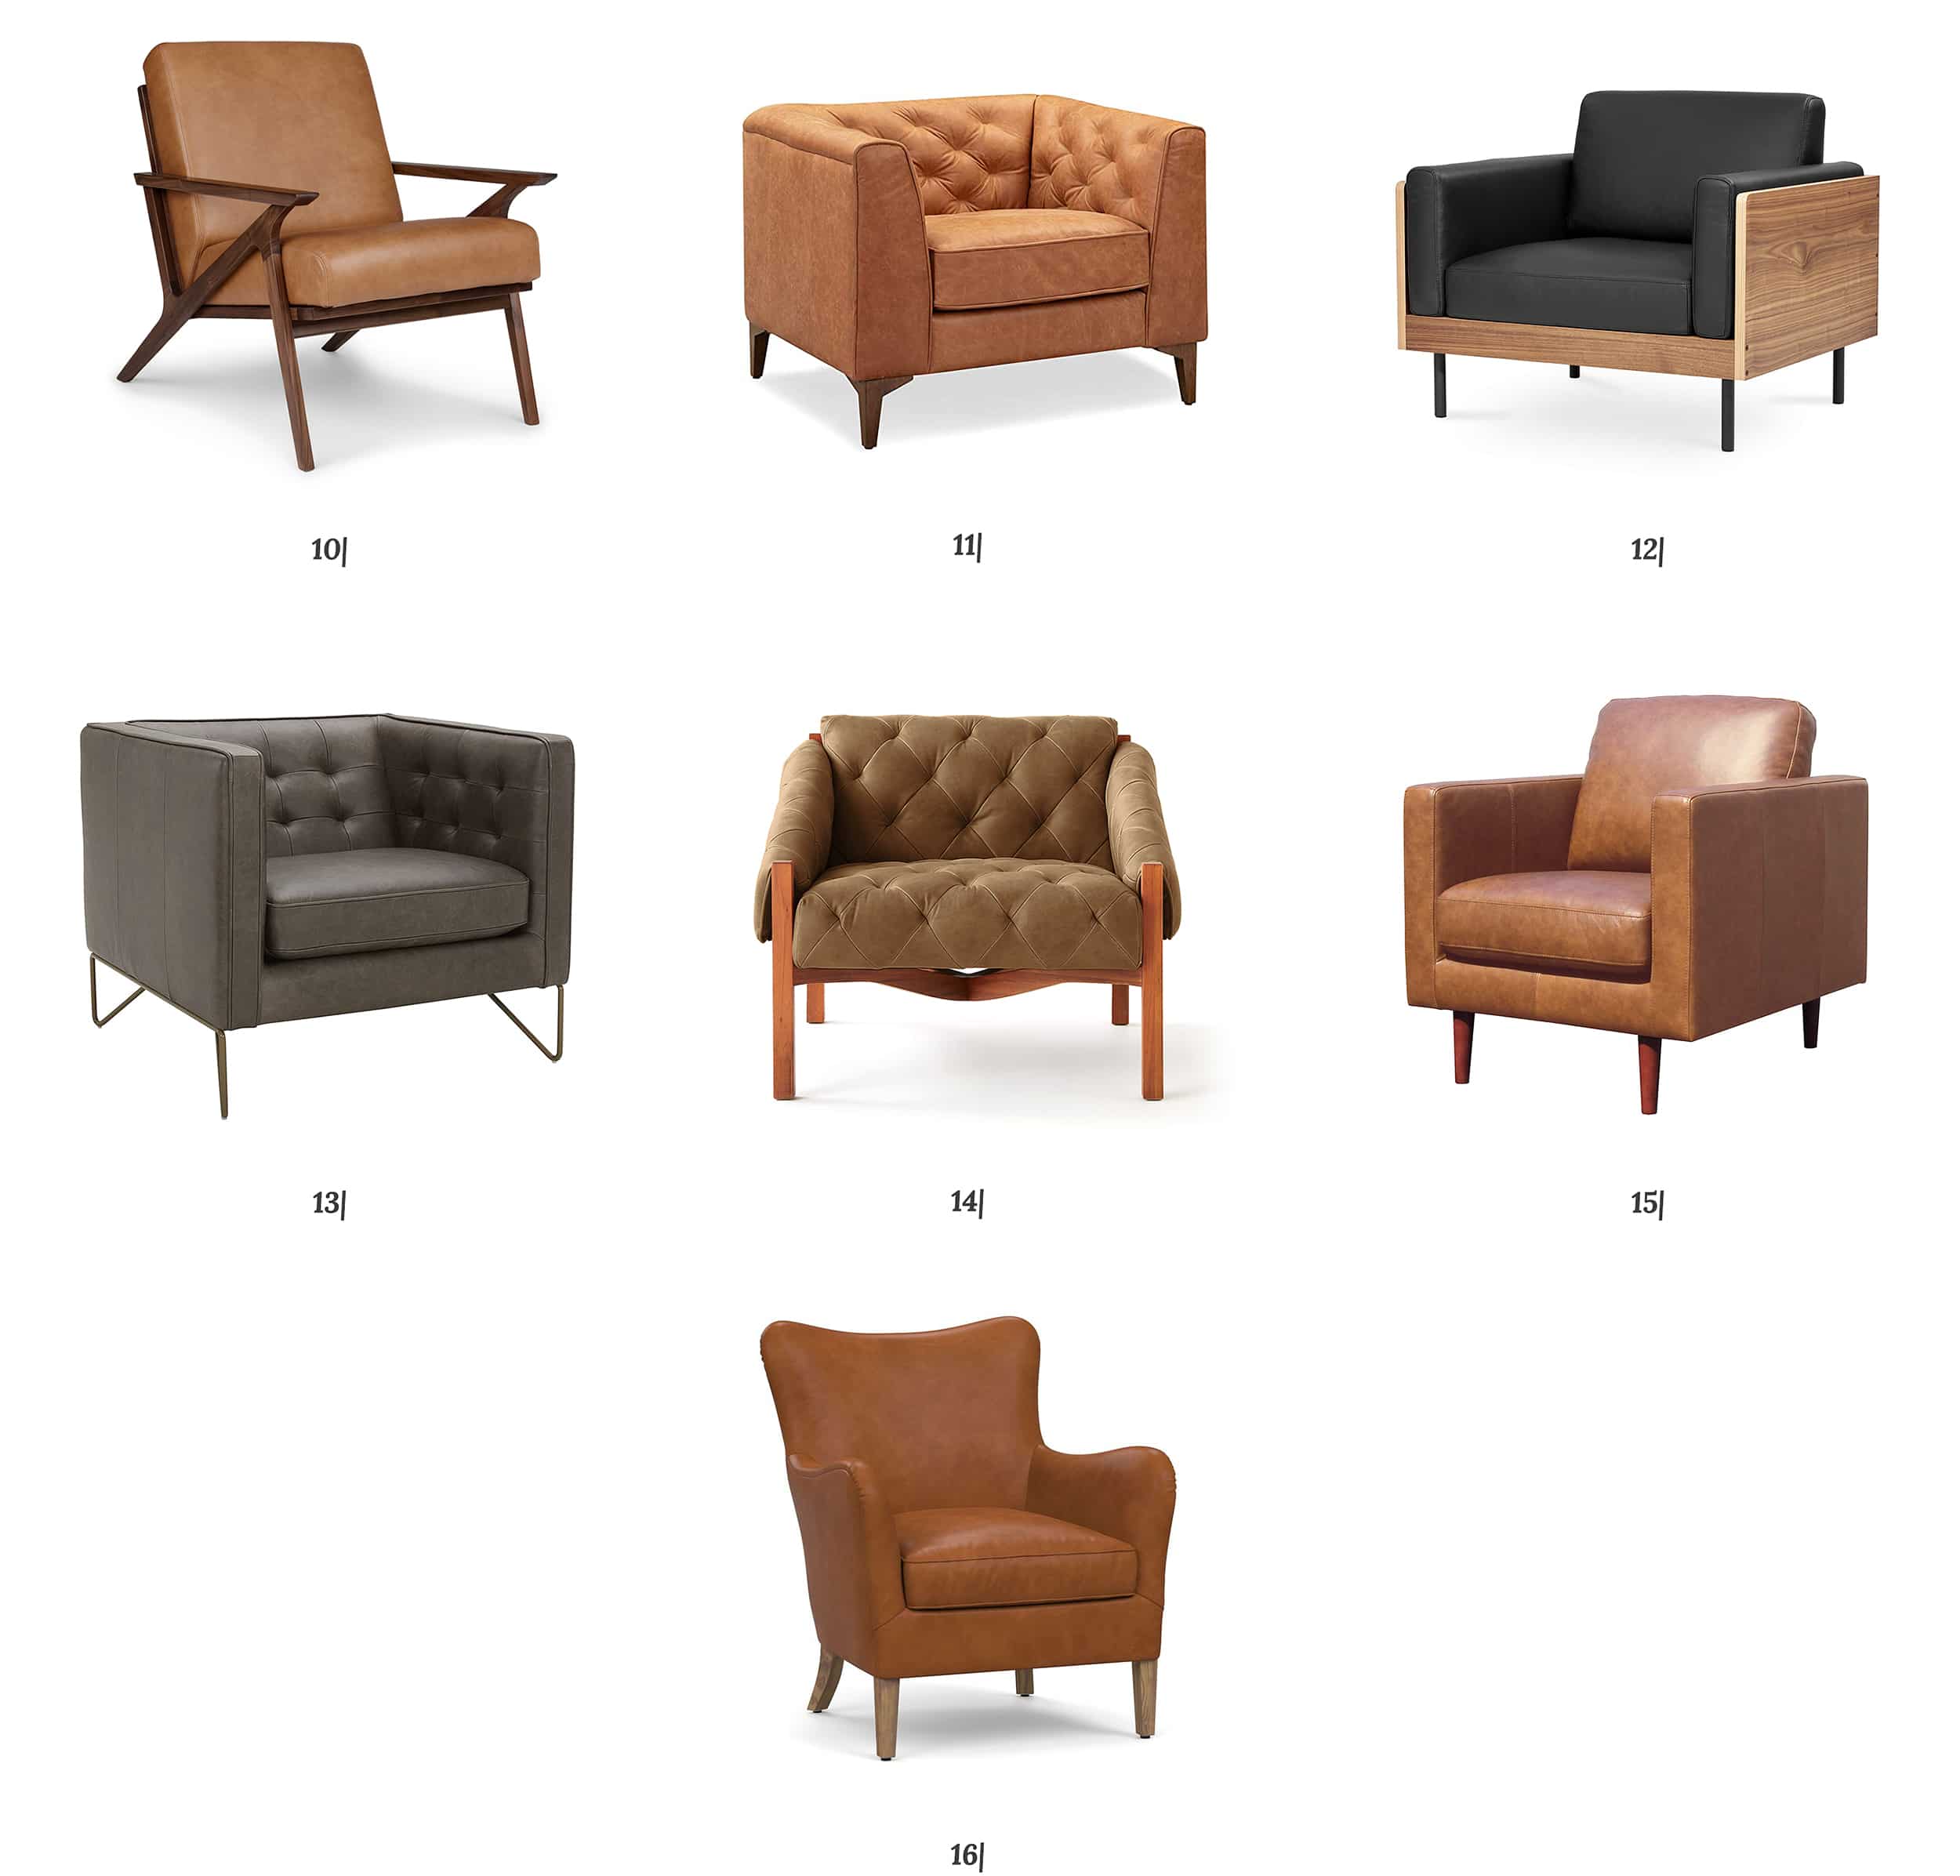 A roundup of 7 leather chairs priced between $750 and $1500 // via Yellow Brick Home